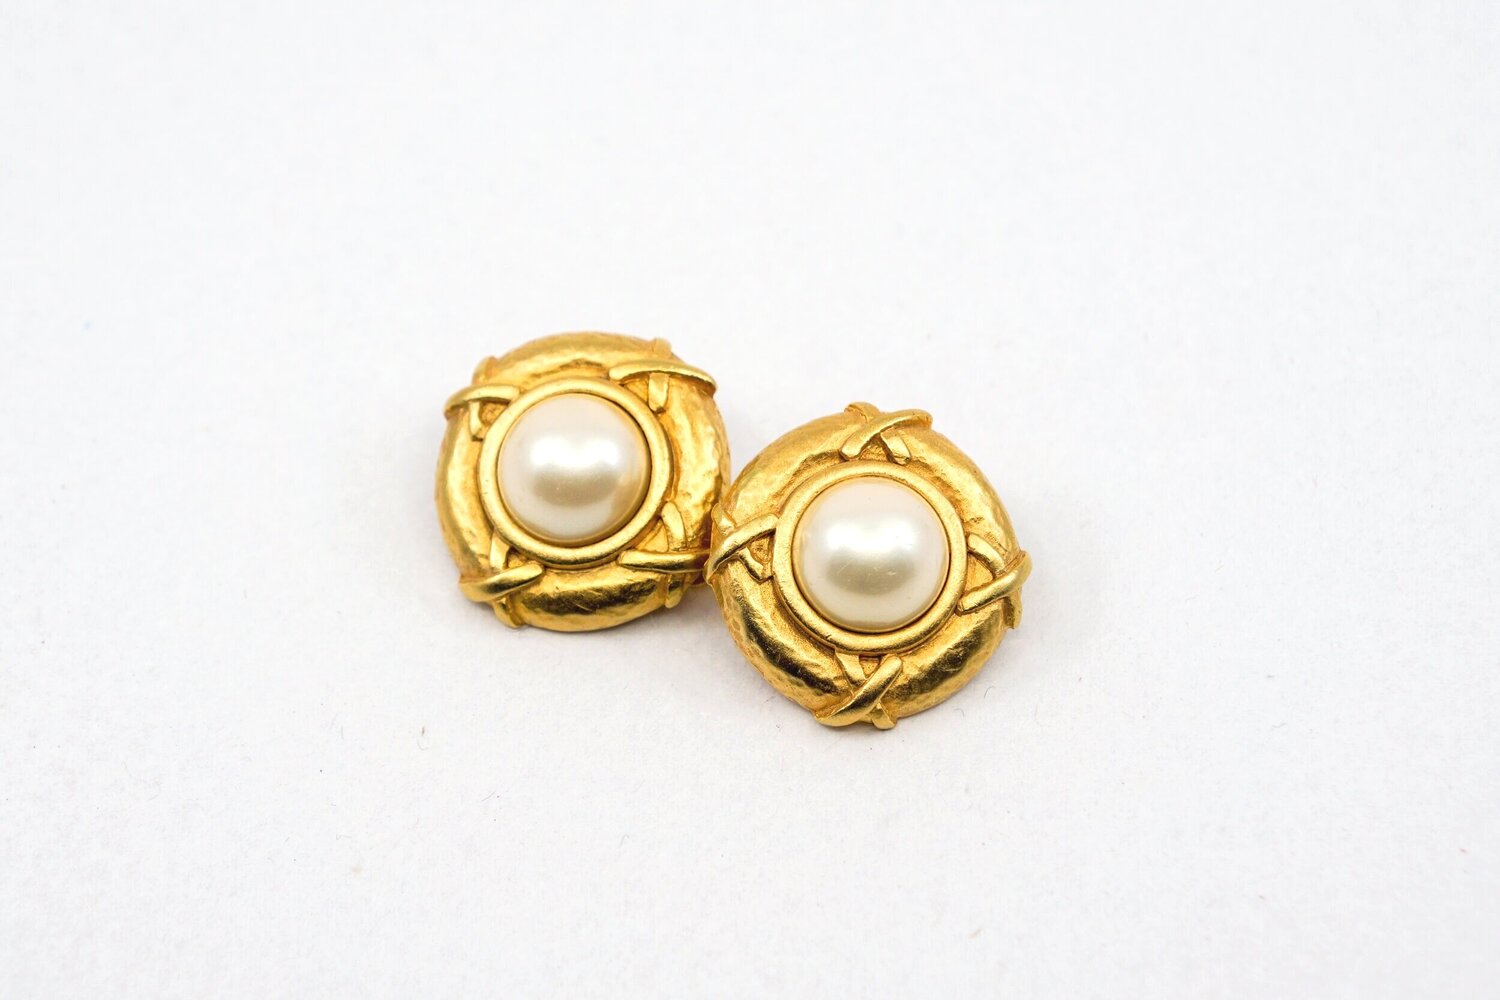 Vintage iconic style costume pearl earrings — Le Grand Strip